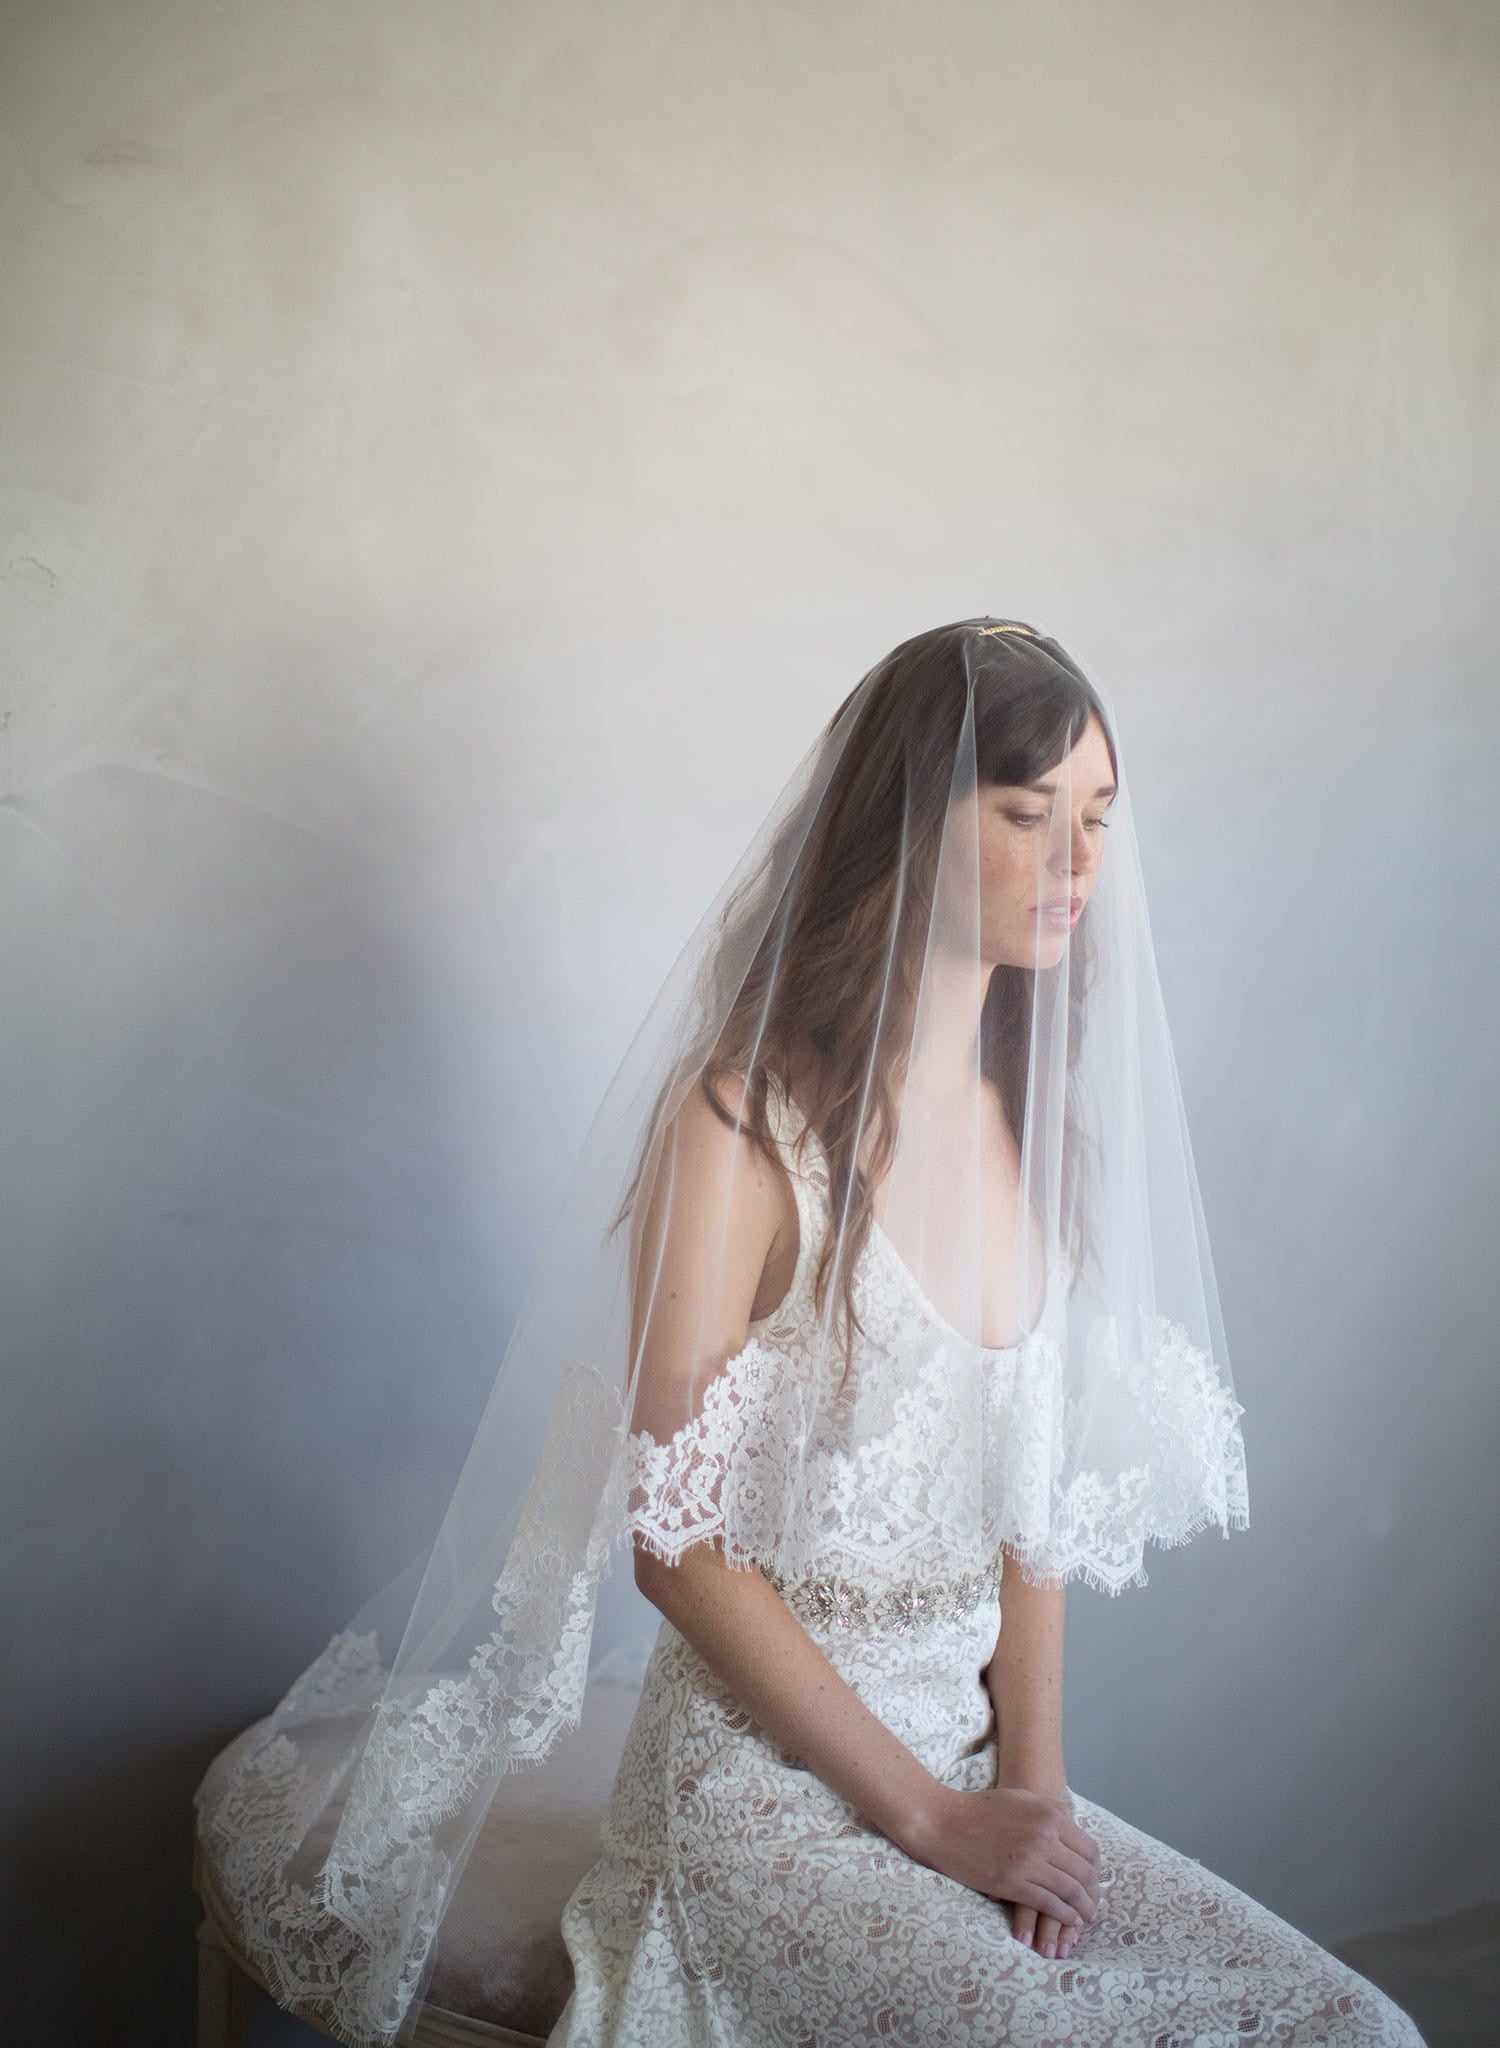 One Blushing Bride Cathedral Veil with Floral French Lace Trim, White/ Ivory White / Chapel 90 Inches / Lace on Bottom of Veil